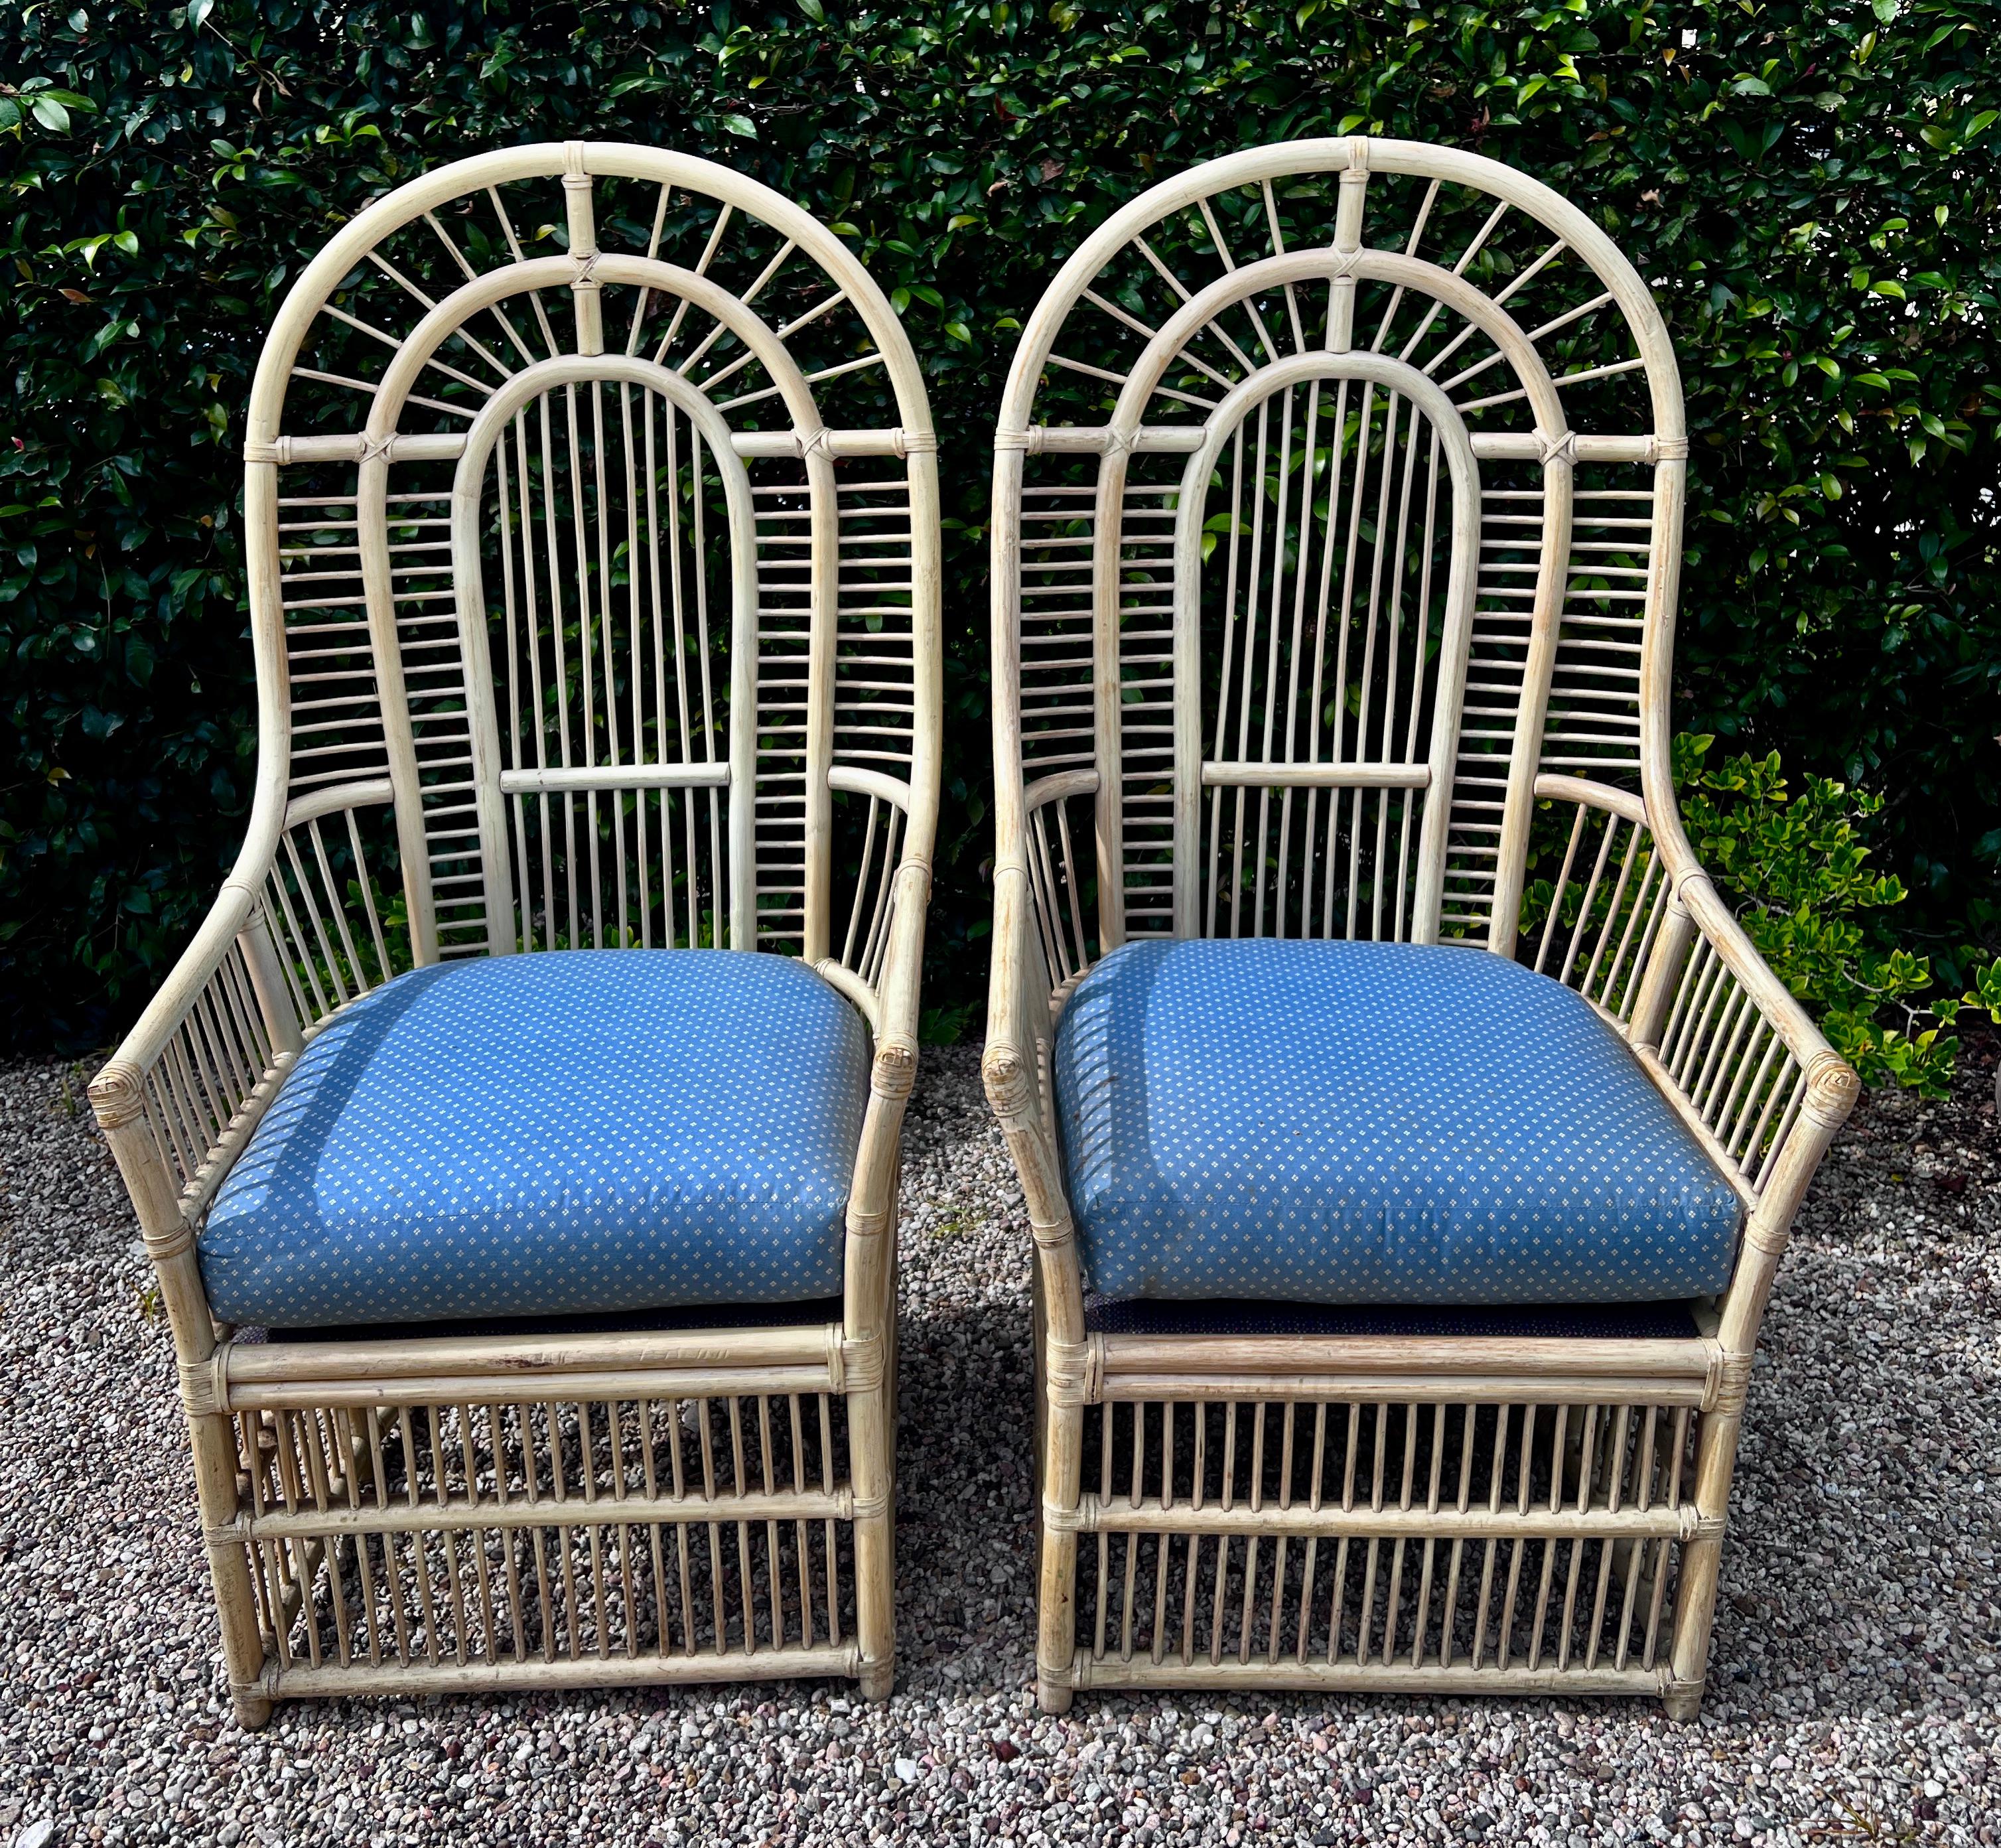 A stunning Pair of High Back Rattan Chairs with a rounded top and intricate detailed rattan work.  The pair are very sturdy and comfortable.  They are large and roomy, making them comfortable and a statement.

The pair were a custom made chair for a